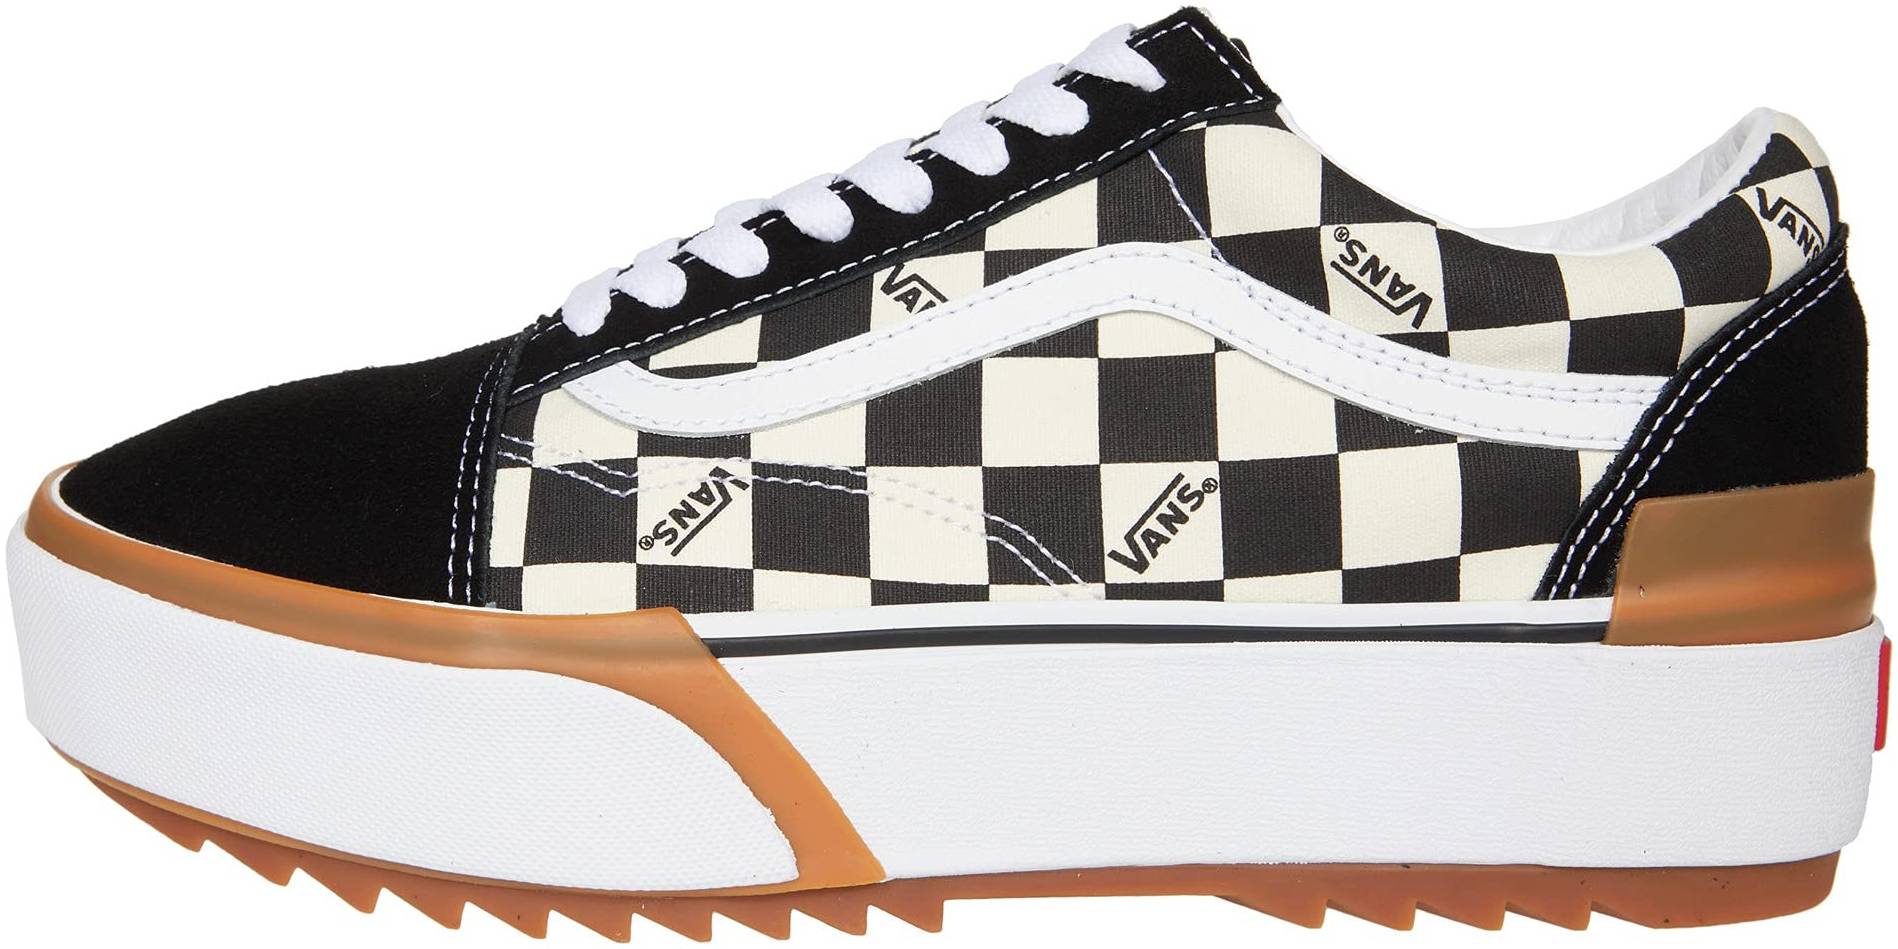 chaussures vans old skool stacked حظيرة حيوانات